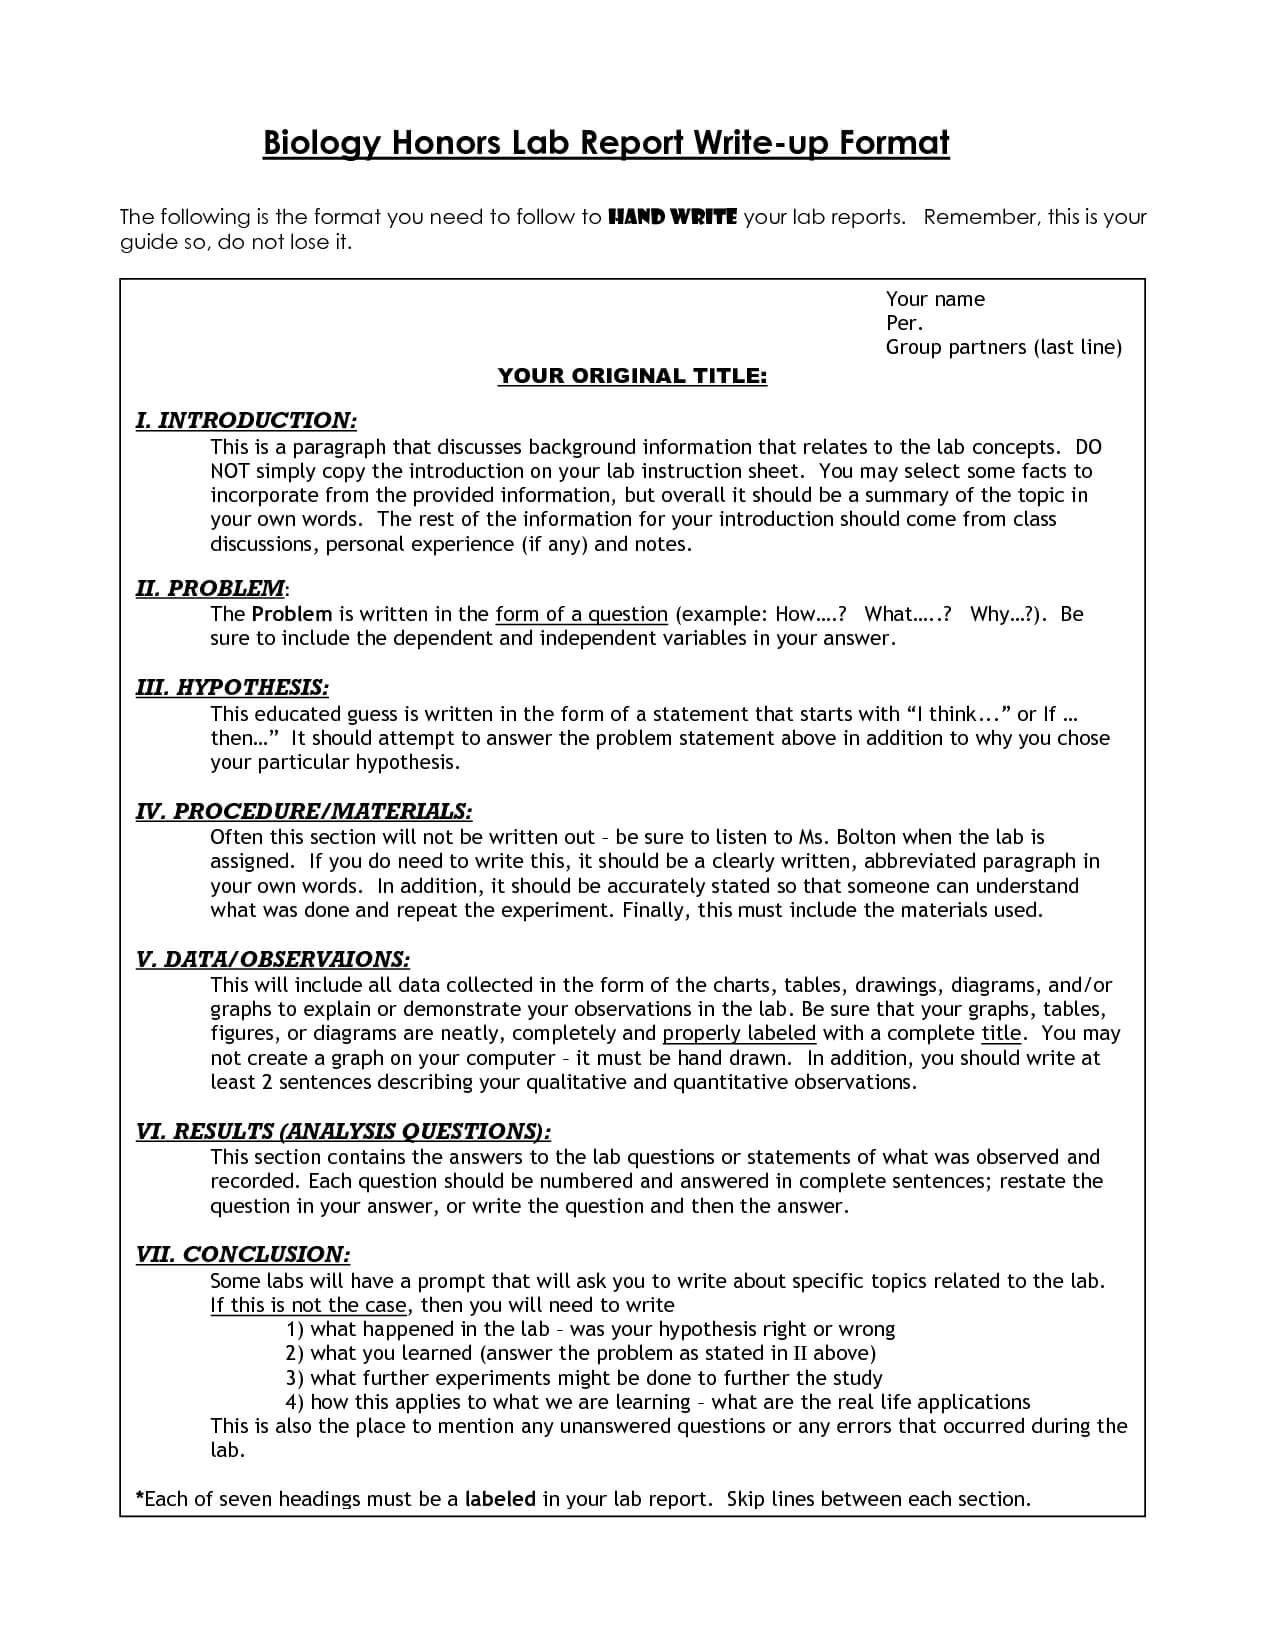 Biology Lab Report Format Example | Lab Report, Lab Report Intended For Biology Lab Report Template